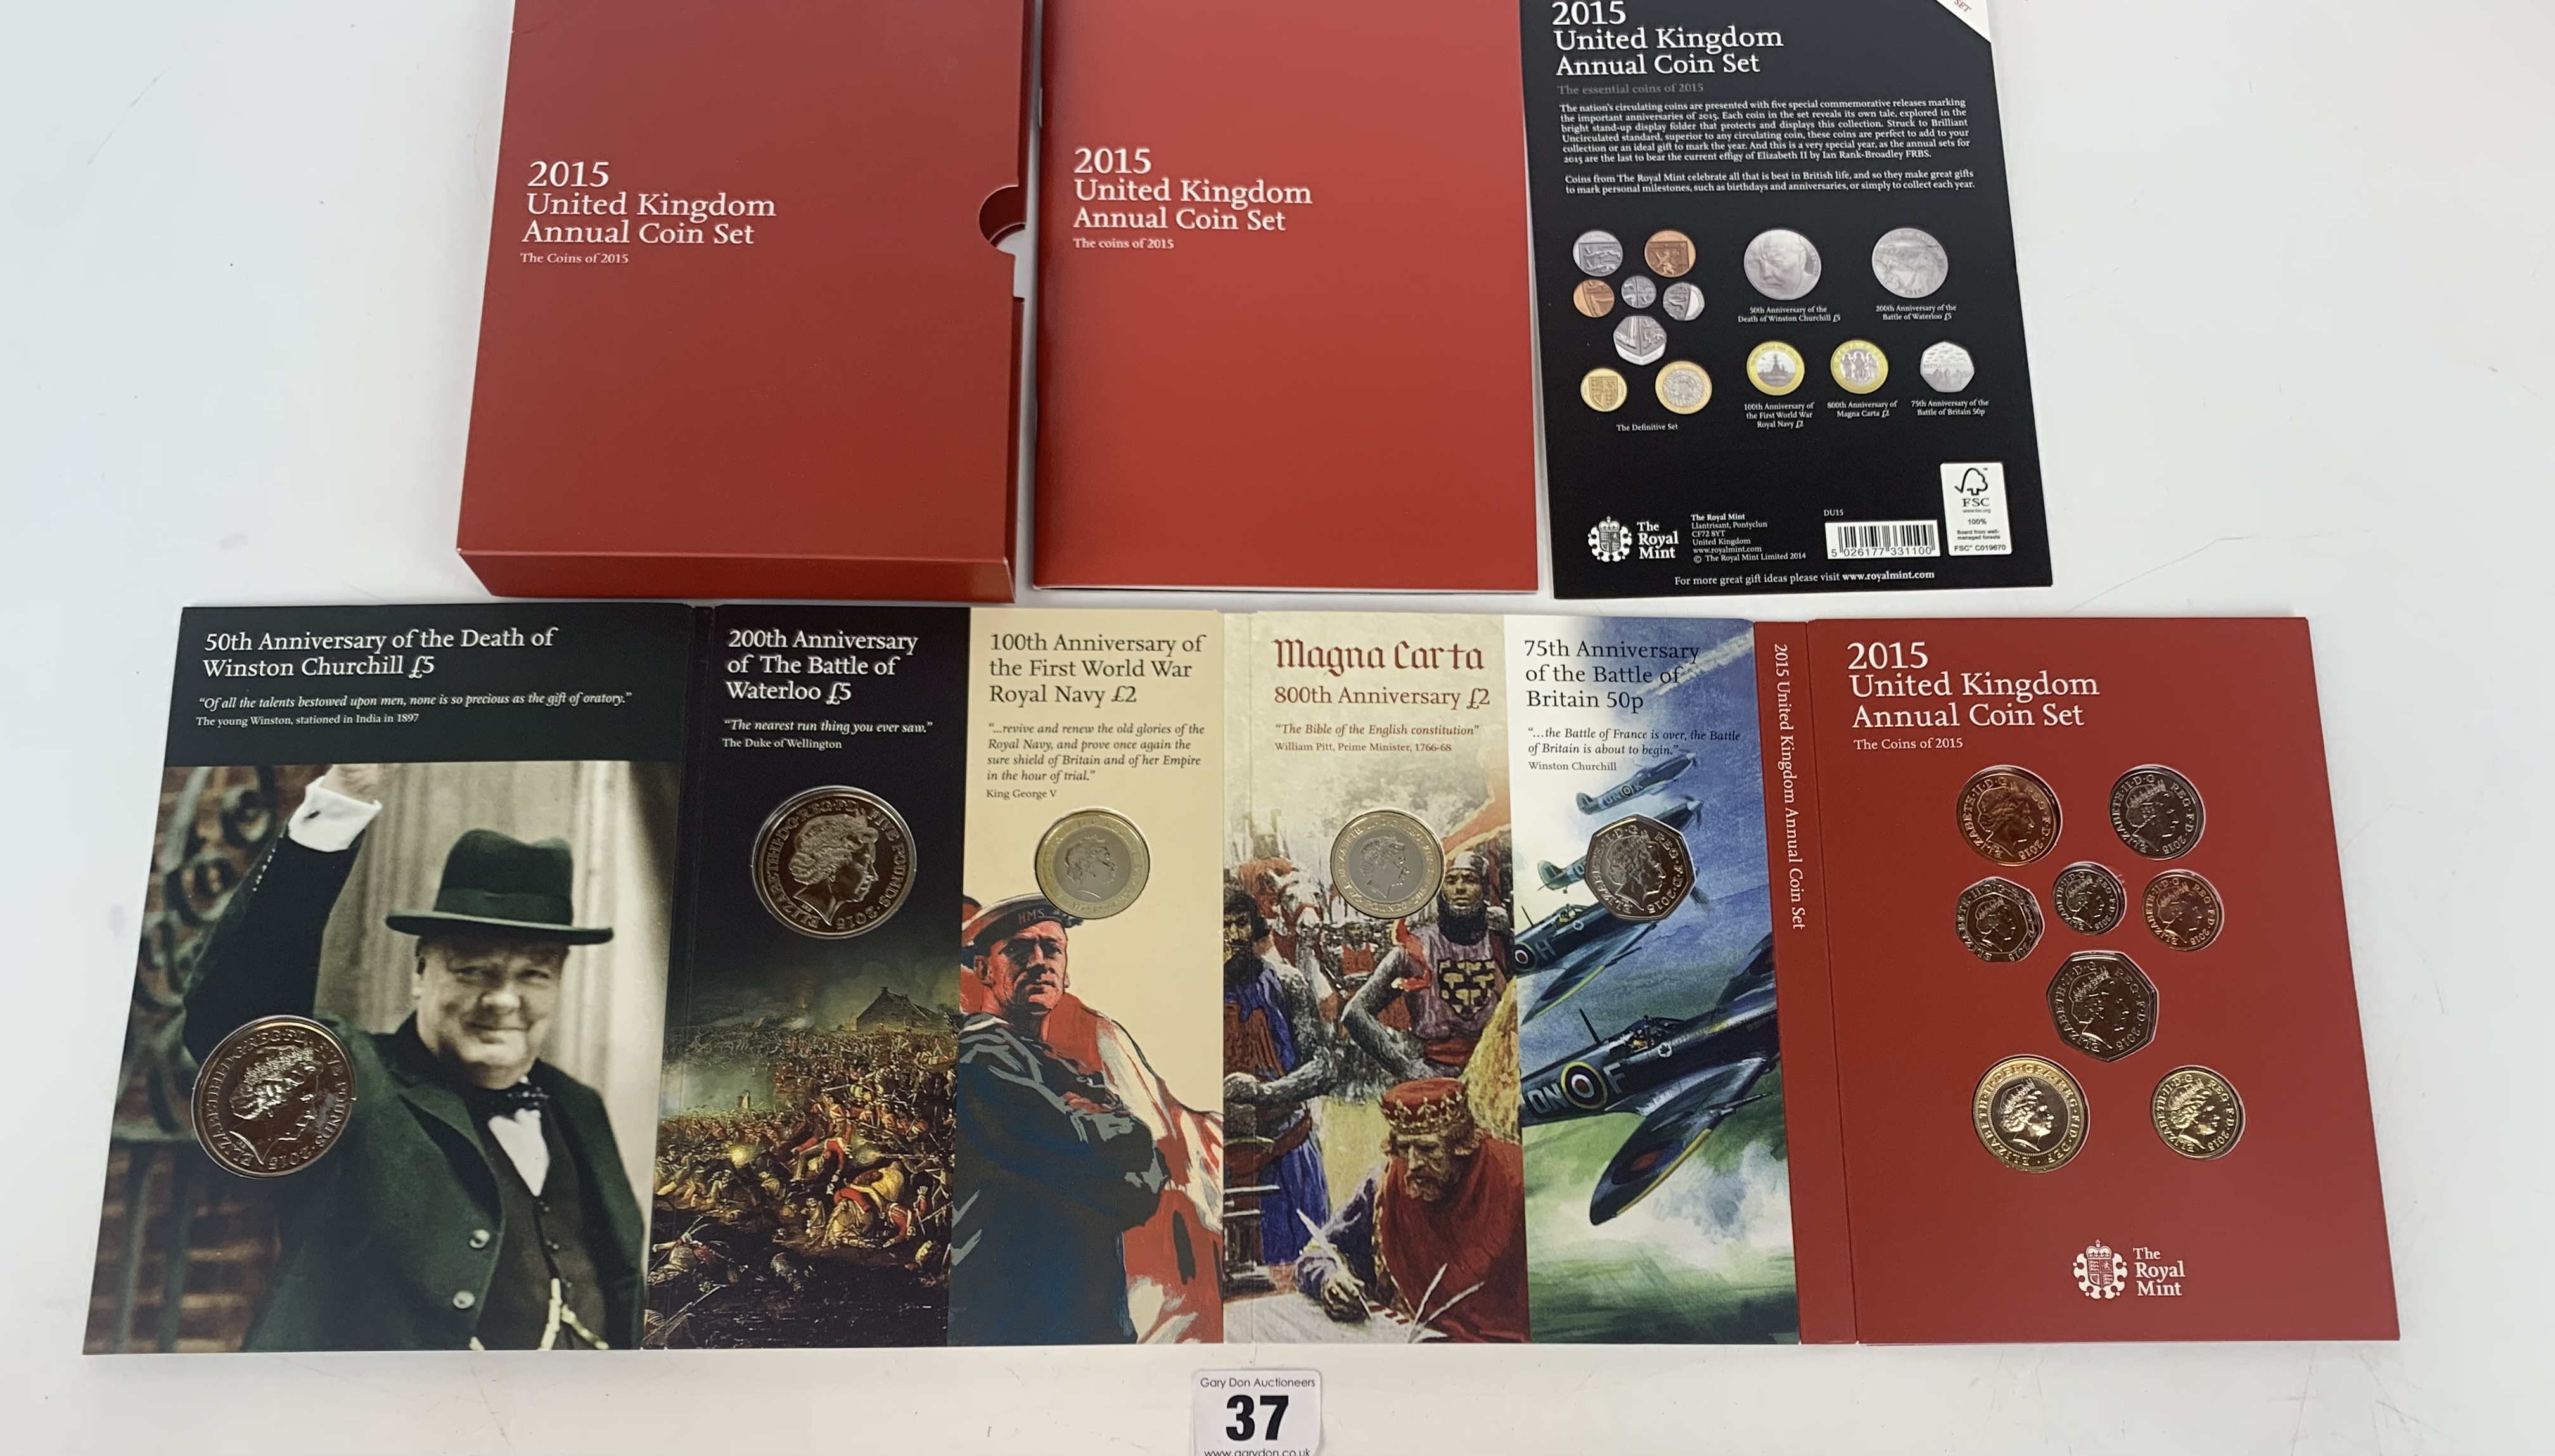 Royal Mint 2015 UK Annual Coin Set - Image 2 of 2